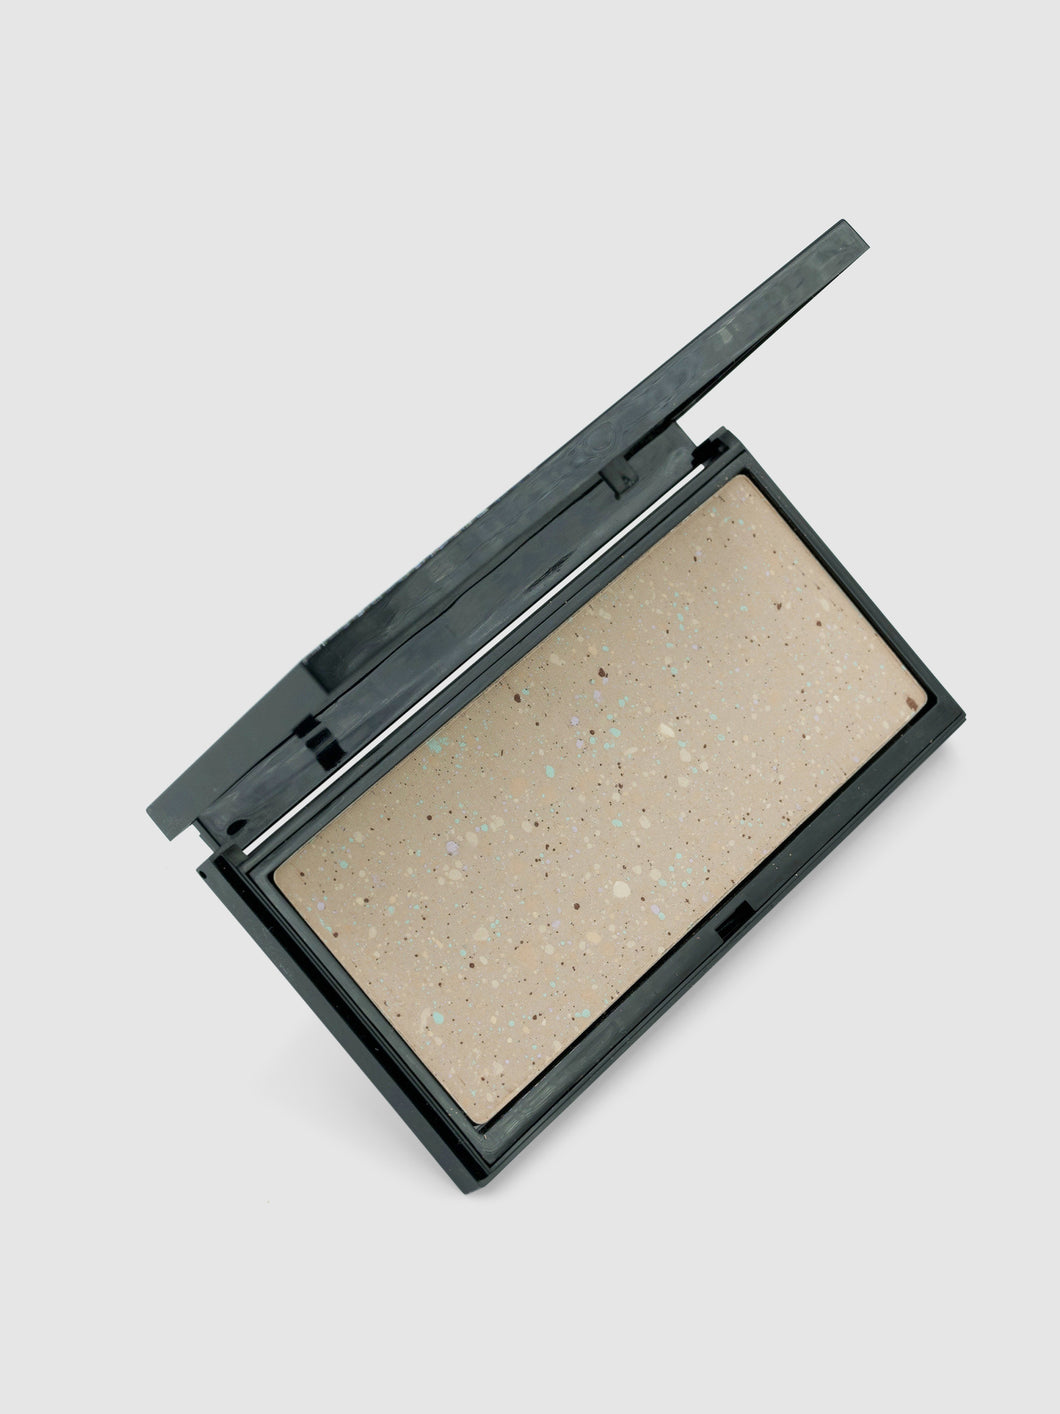 Couture Finish Powder Deluxe Compact